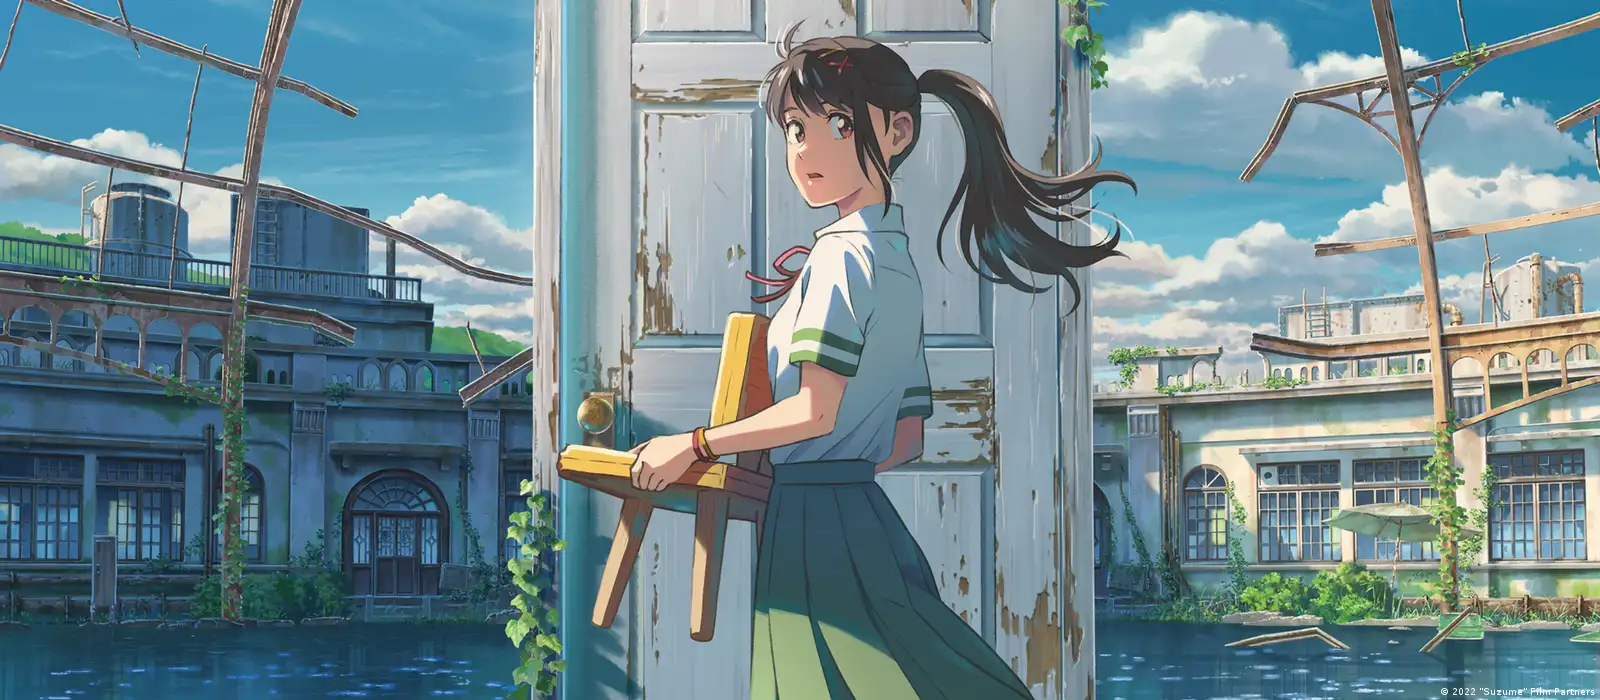 9 Anime That Promote Mental Health Awareness